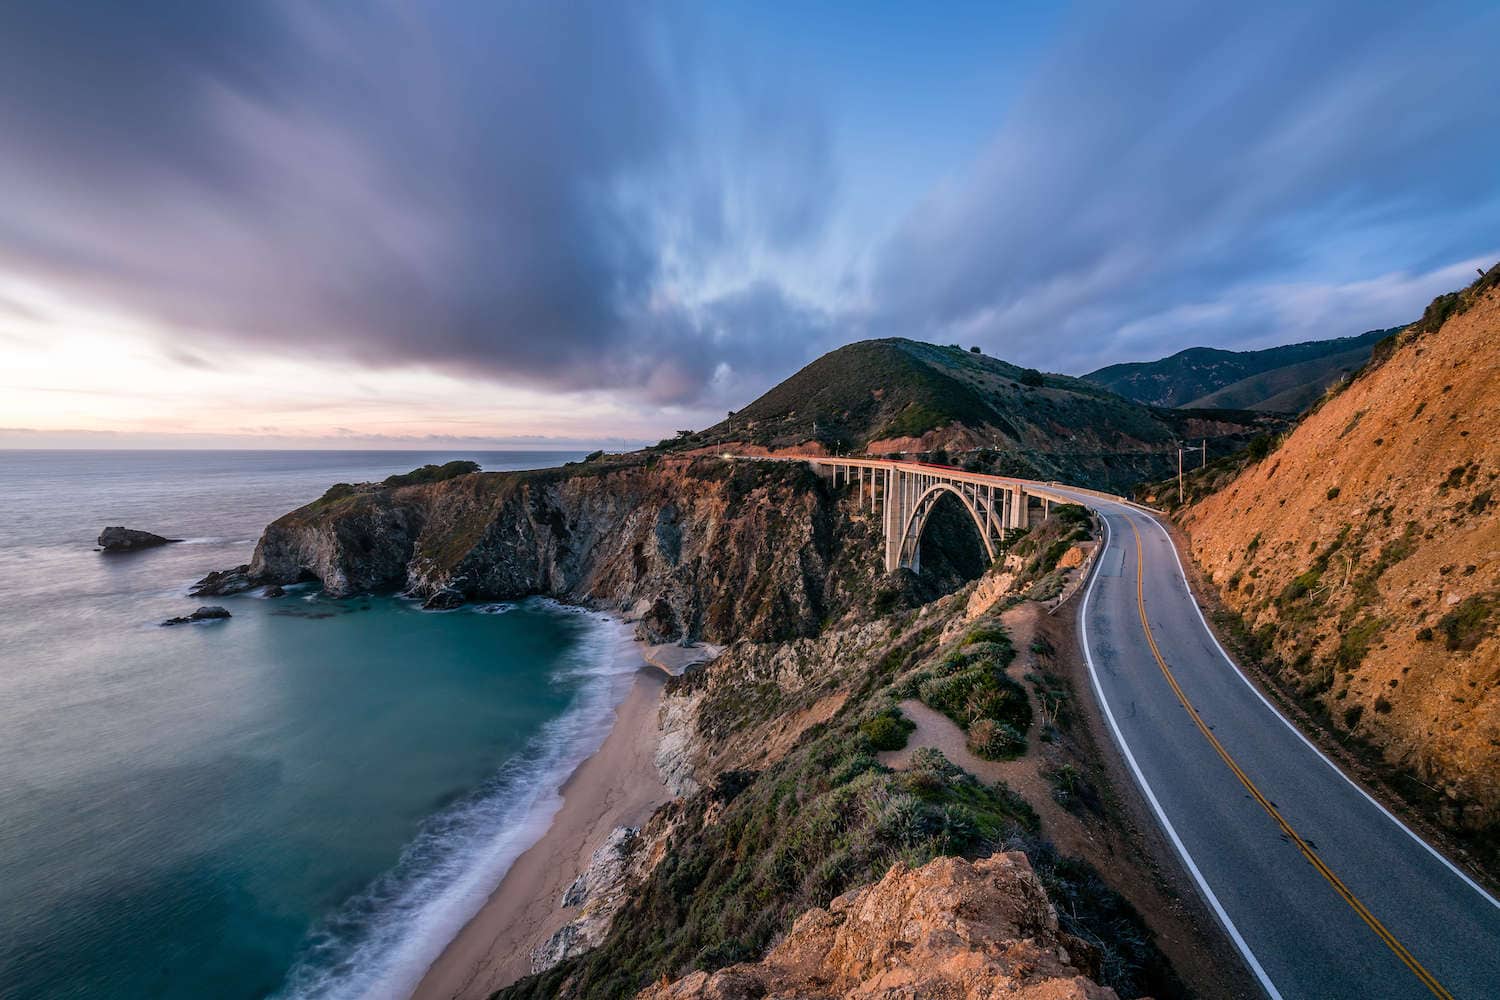 See the best California road trips stops for outdoor adventure including California's National Parks, monuments, coastal towns, and more.